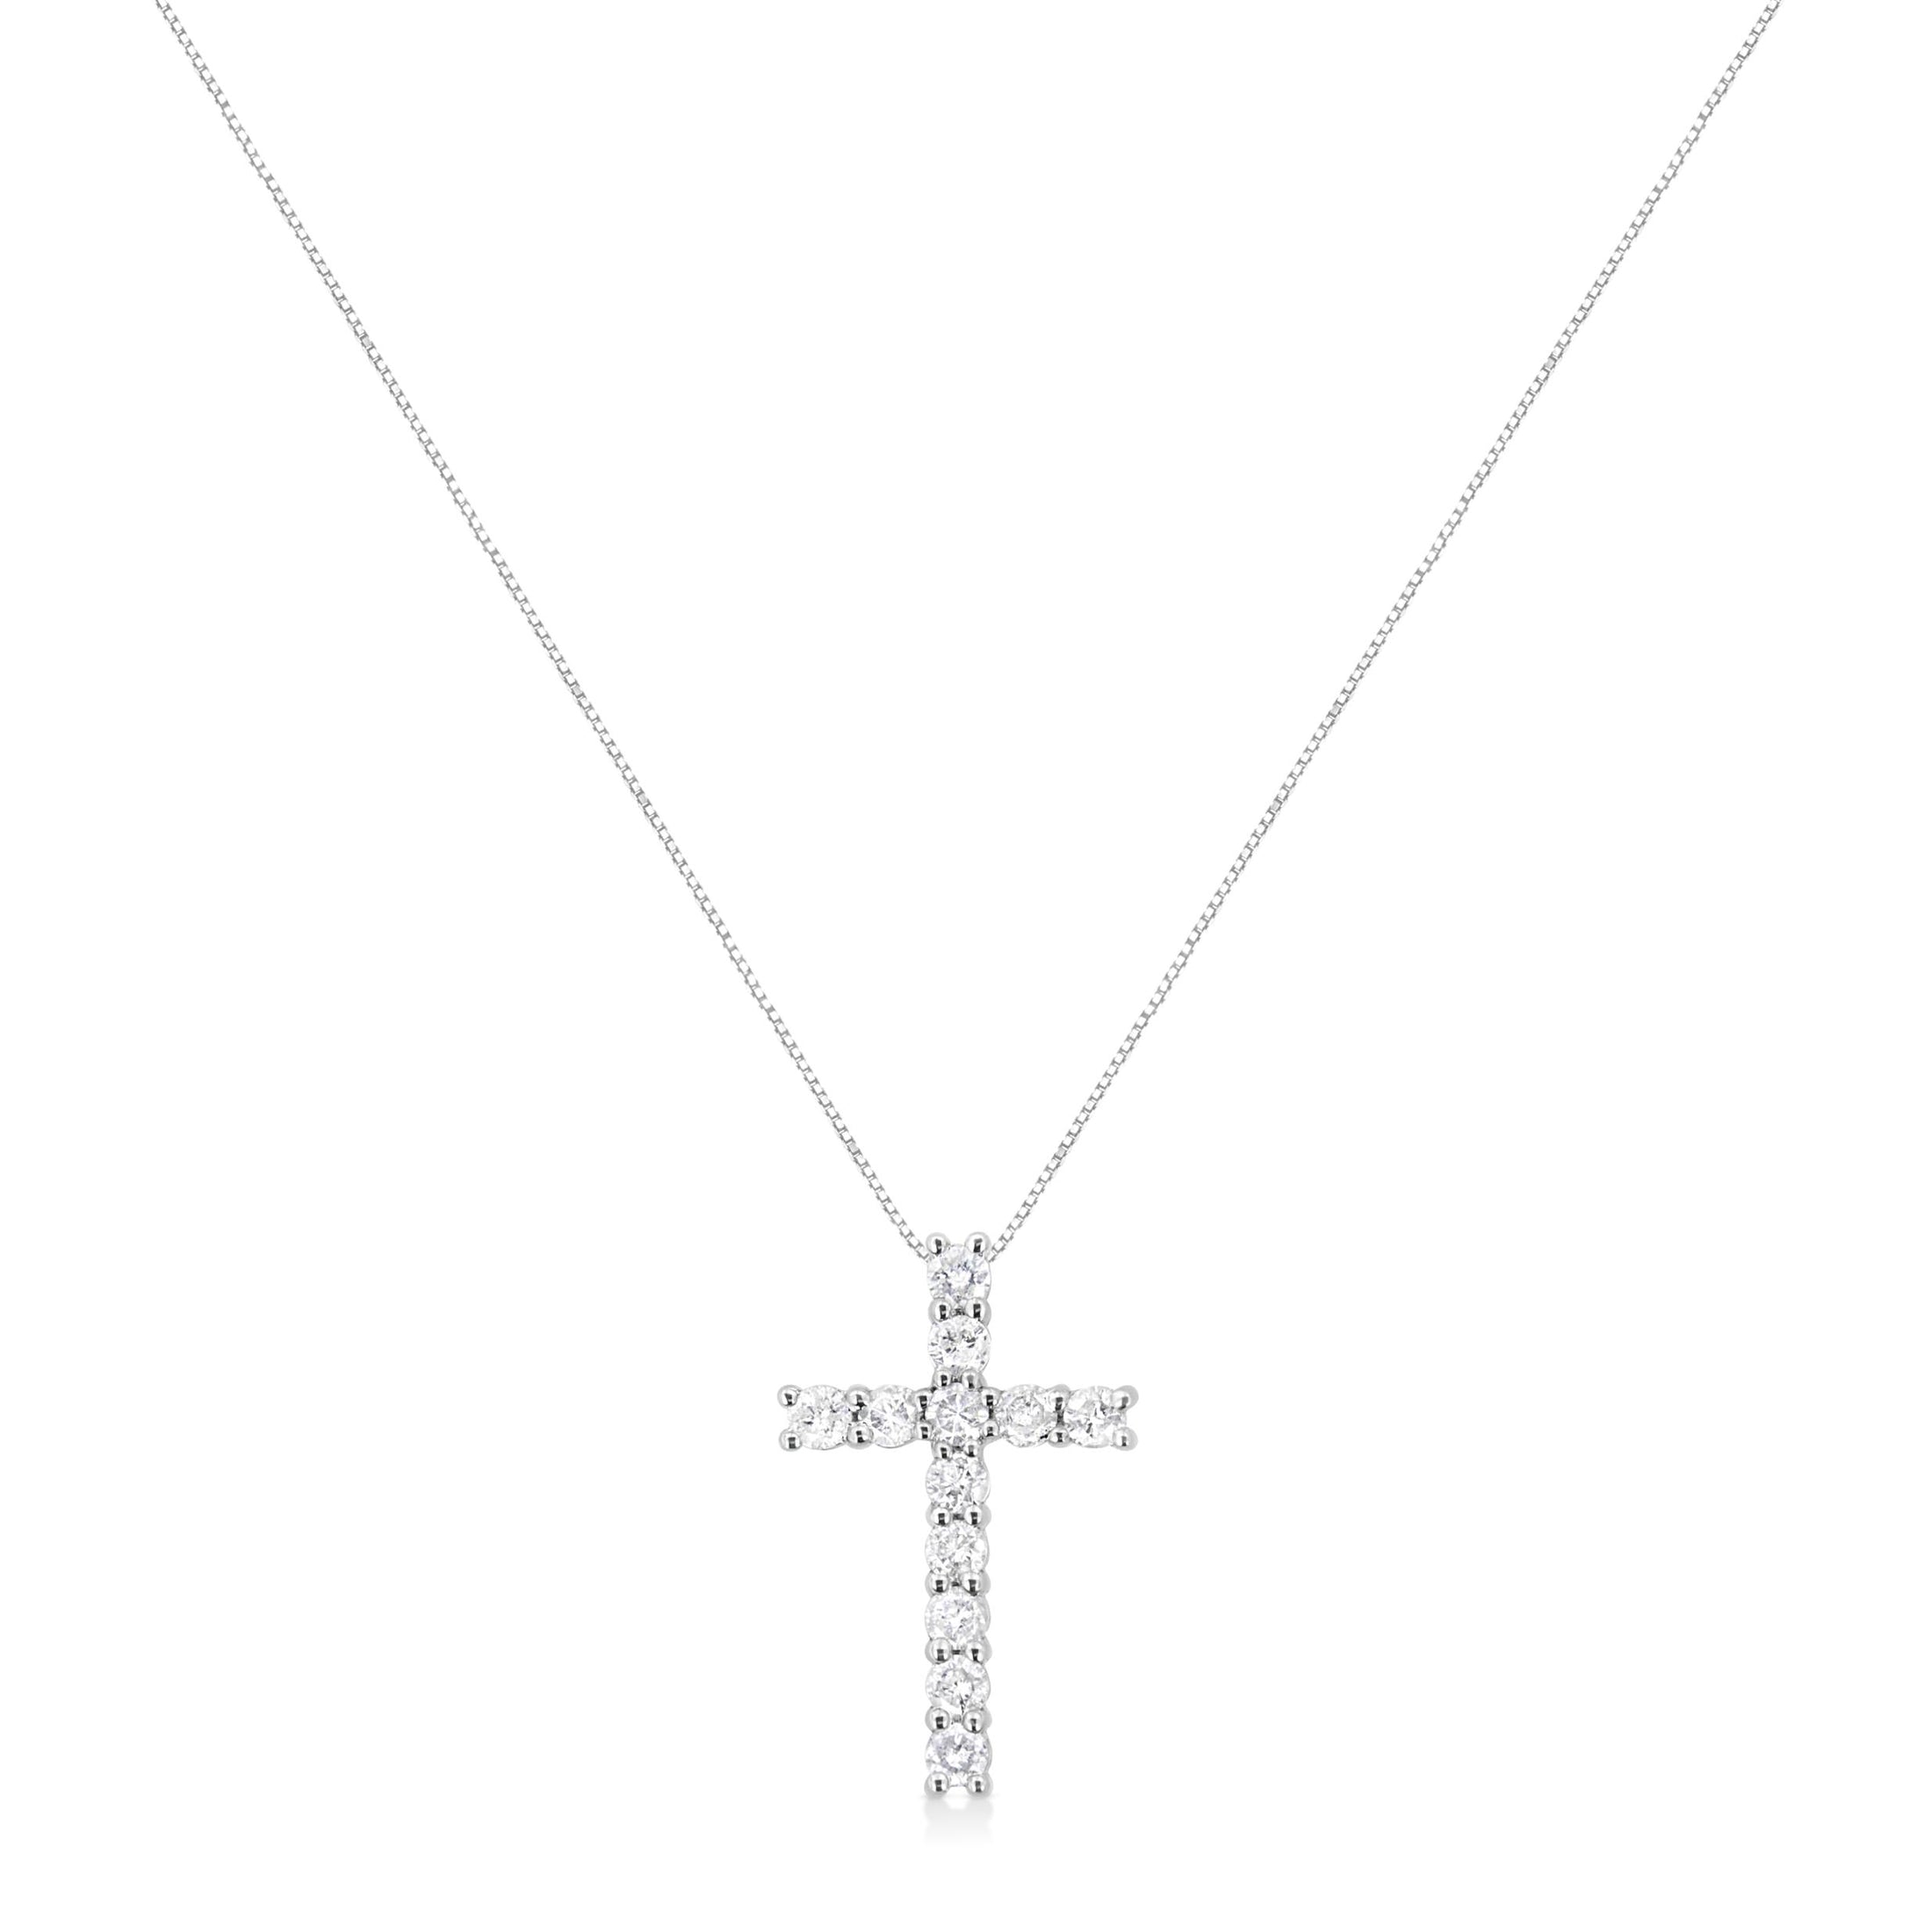 .925 Sterling Silver 1.00 cttw Traditional Diamond Cross 18" Pendant Necklace